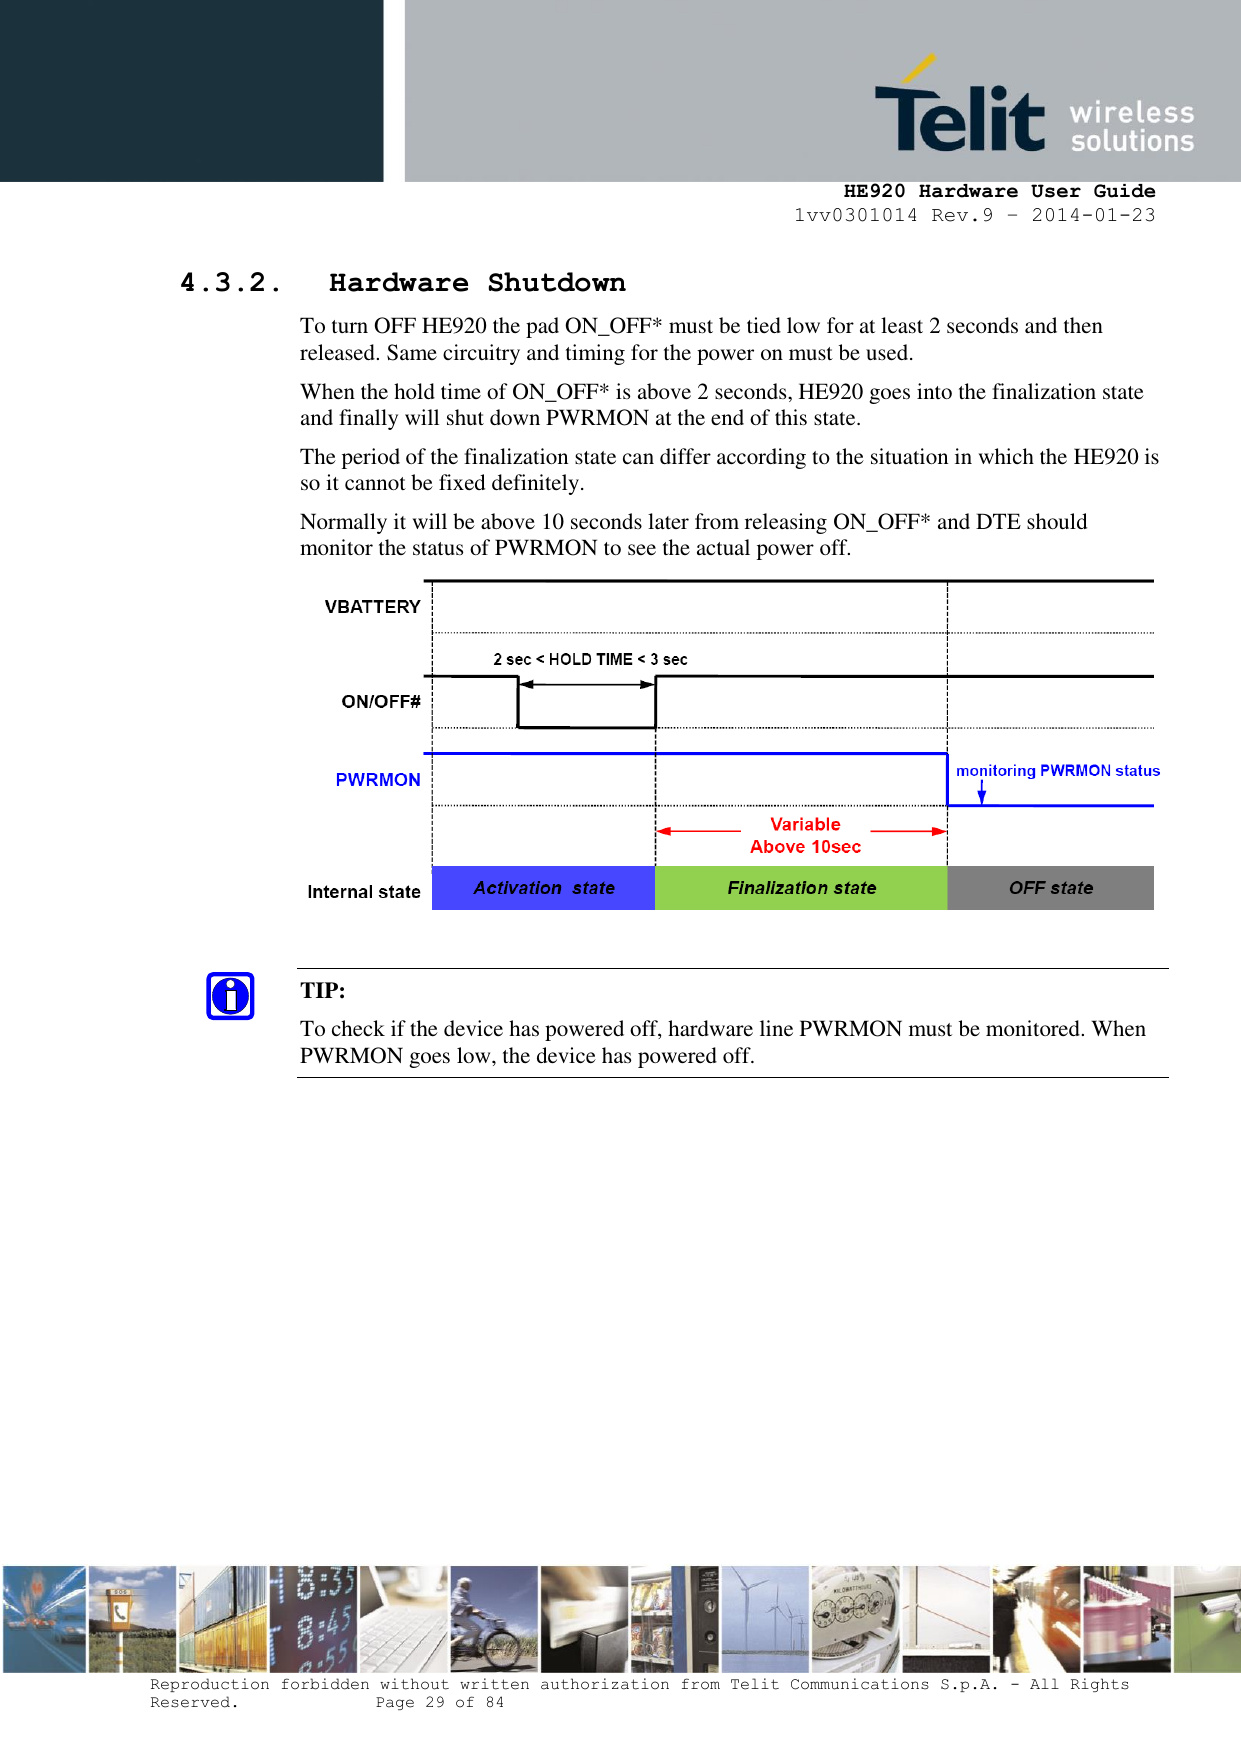     HE920 Hardware User Guide 1vv0301014 Rev.9 – 2014-01-23 Reproduction forbidden without written authorization from Telit Communications S.p.A. - All Rights Reserved.    Page 29 of 84  4.3.2. Hardware Shutdown To turn OFF HE920 the pad ON_OFF* must be tied low for at least 2 seconds and then released. Same circuitry and timing for the power on must be used. When the hold time of ON_OFF* is above 2 seconds, HE920 goes into the finalization state and finally will shut down PWRMON at the end of this state. The period of the finalization state can differ according to the situation in which the HE920 is so it cannot be fixed definitely. Normally it will be above 10 seconds later from releasing ON_OFF* and DTE should monitor the status of PWRMON to see the actual power off.   TIP:  To check if the device has powered off, hardware line PWRMON must be monitored. When PWRMON goes low, the device has powered off.           